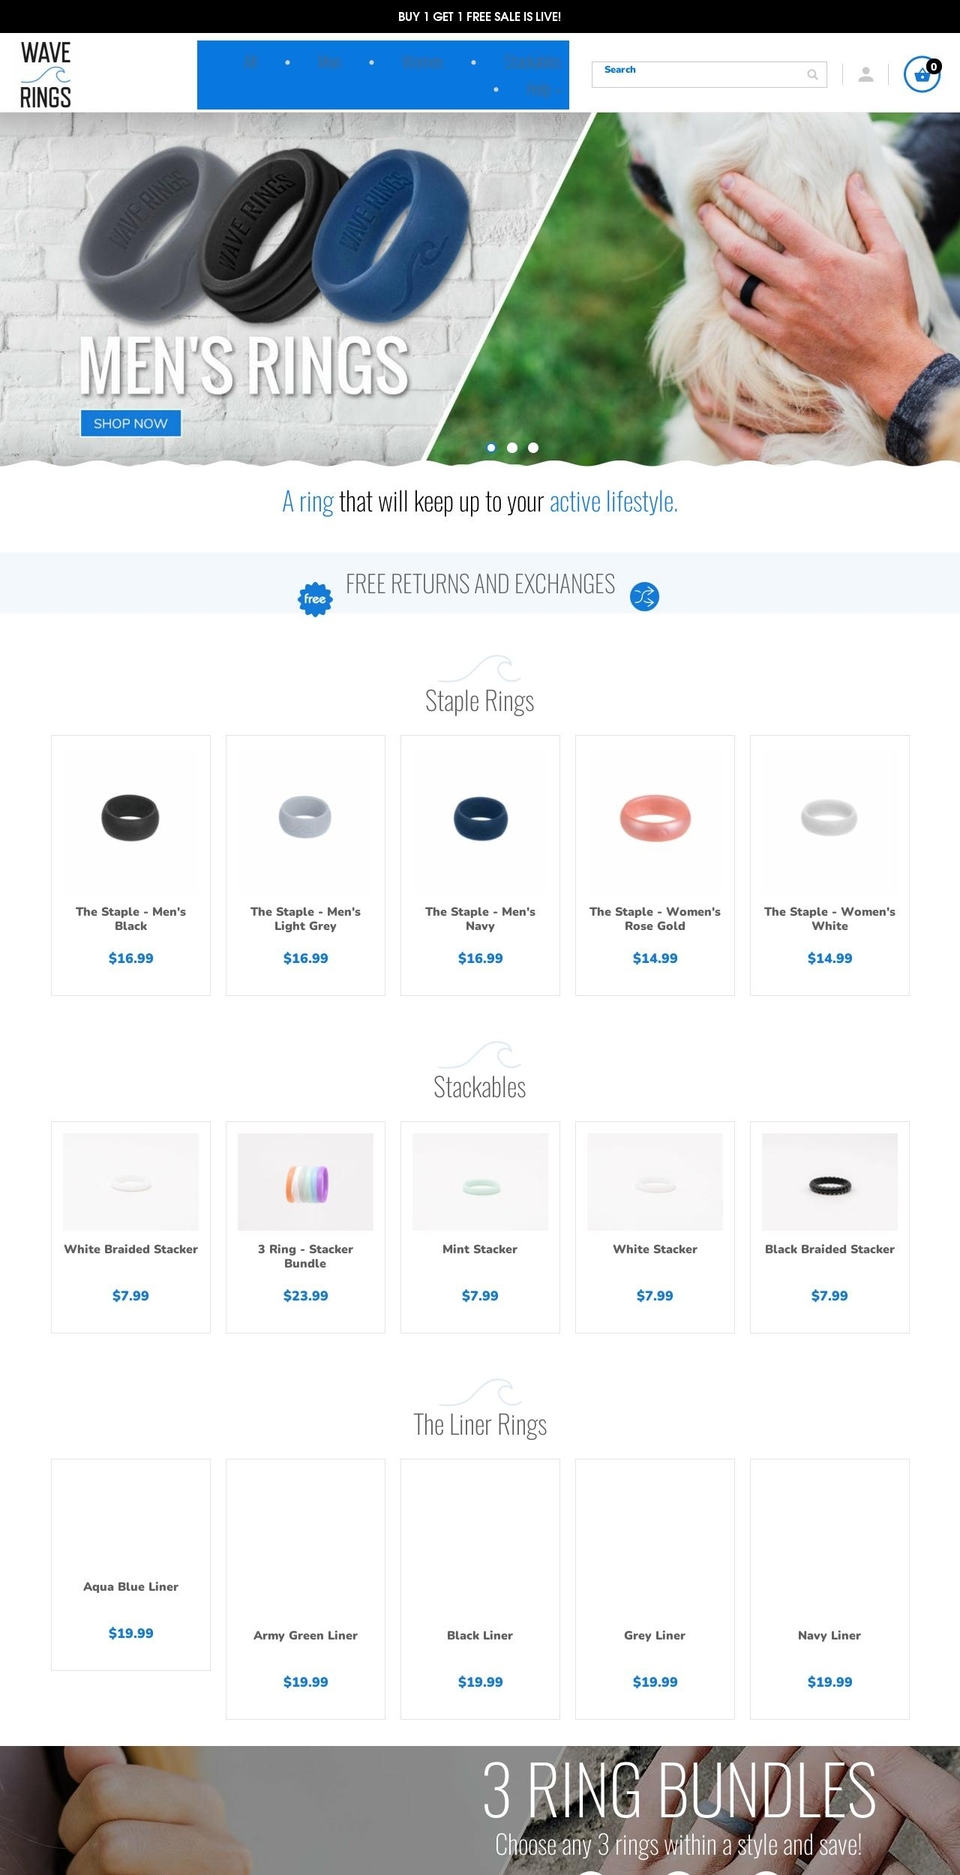 qeretail Shopify theme site example wave-rings.com